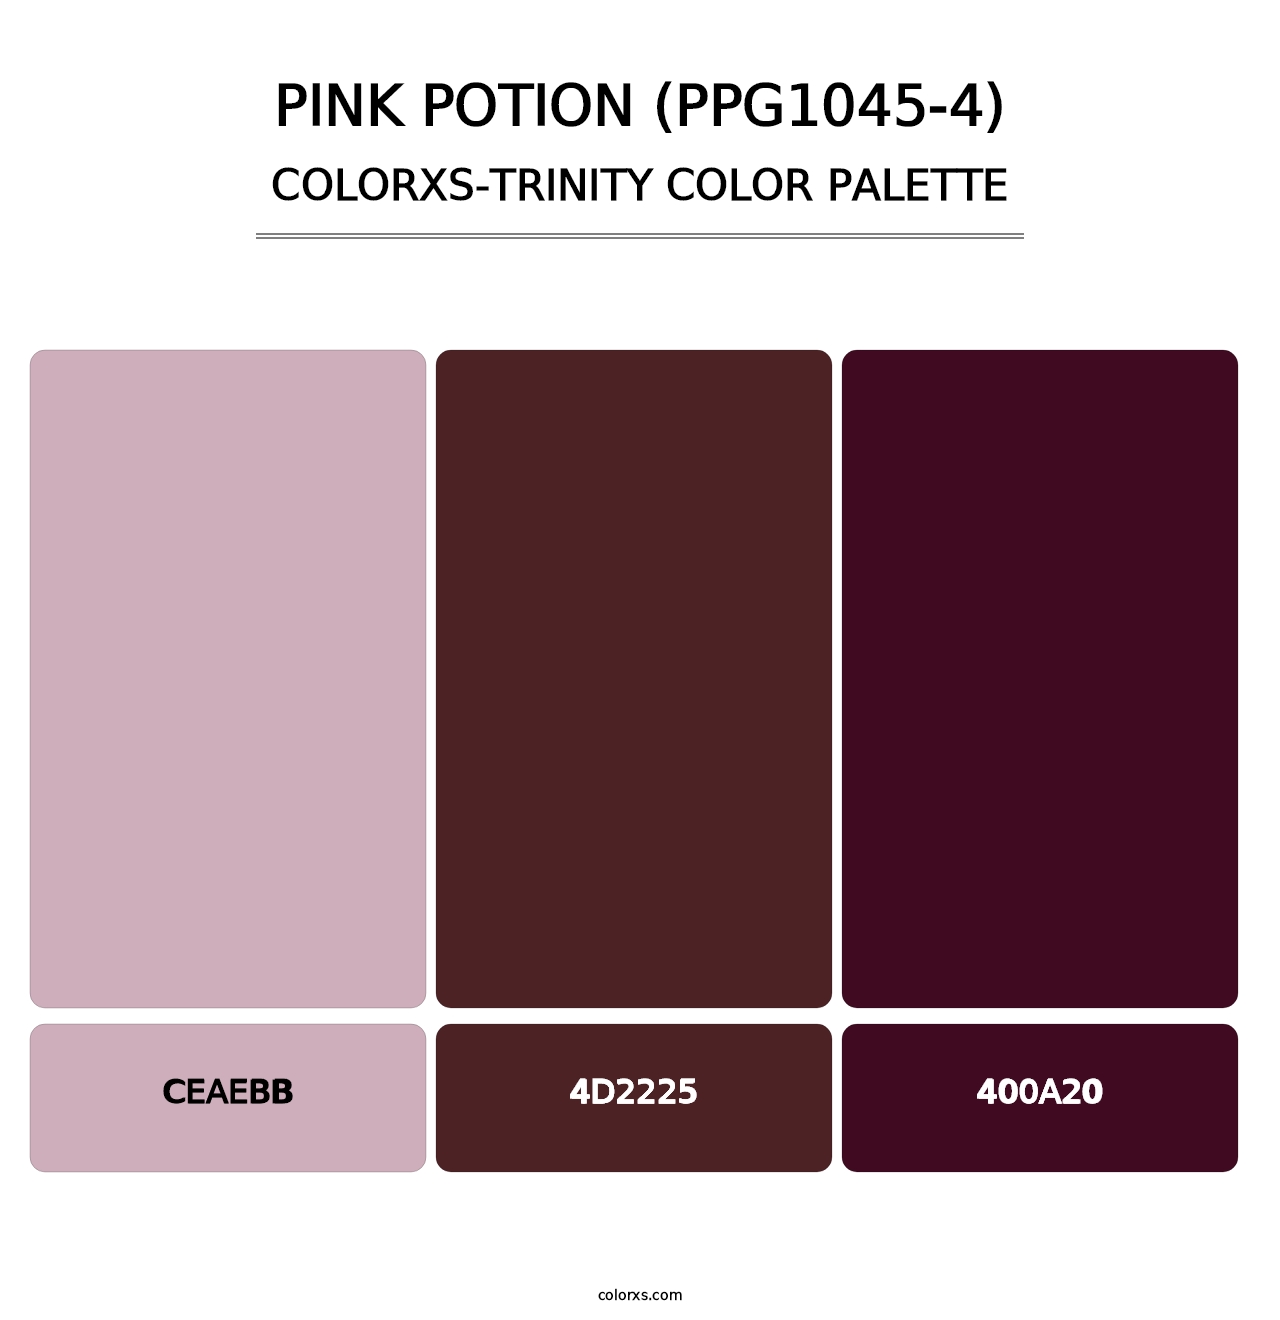 Pink Potion (PPG1045-4) - Colorxs Trinity Palette